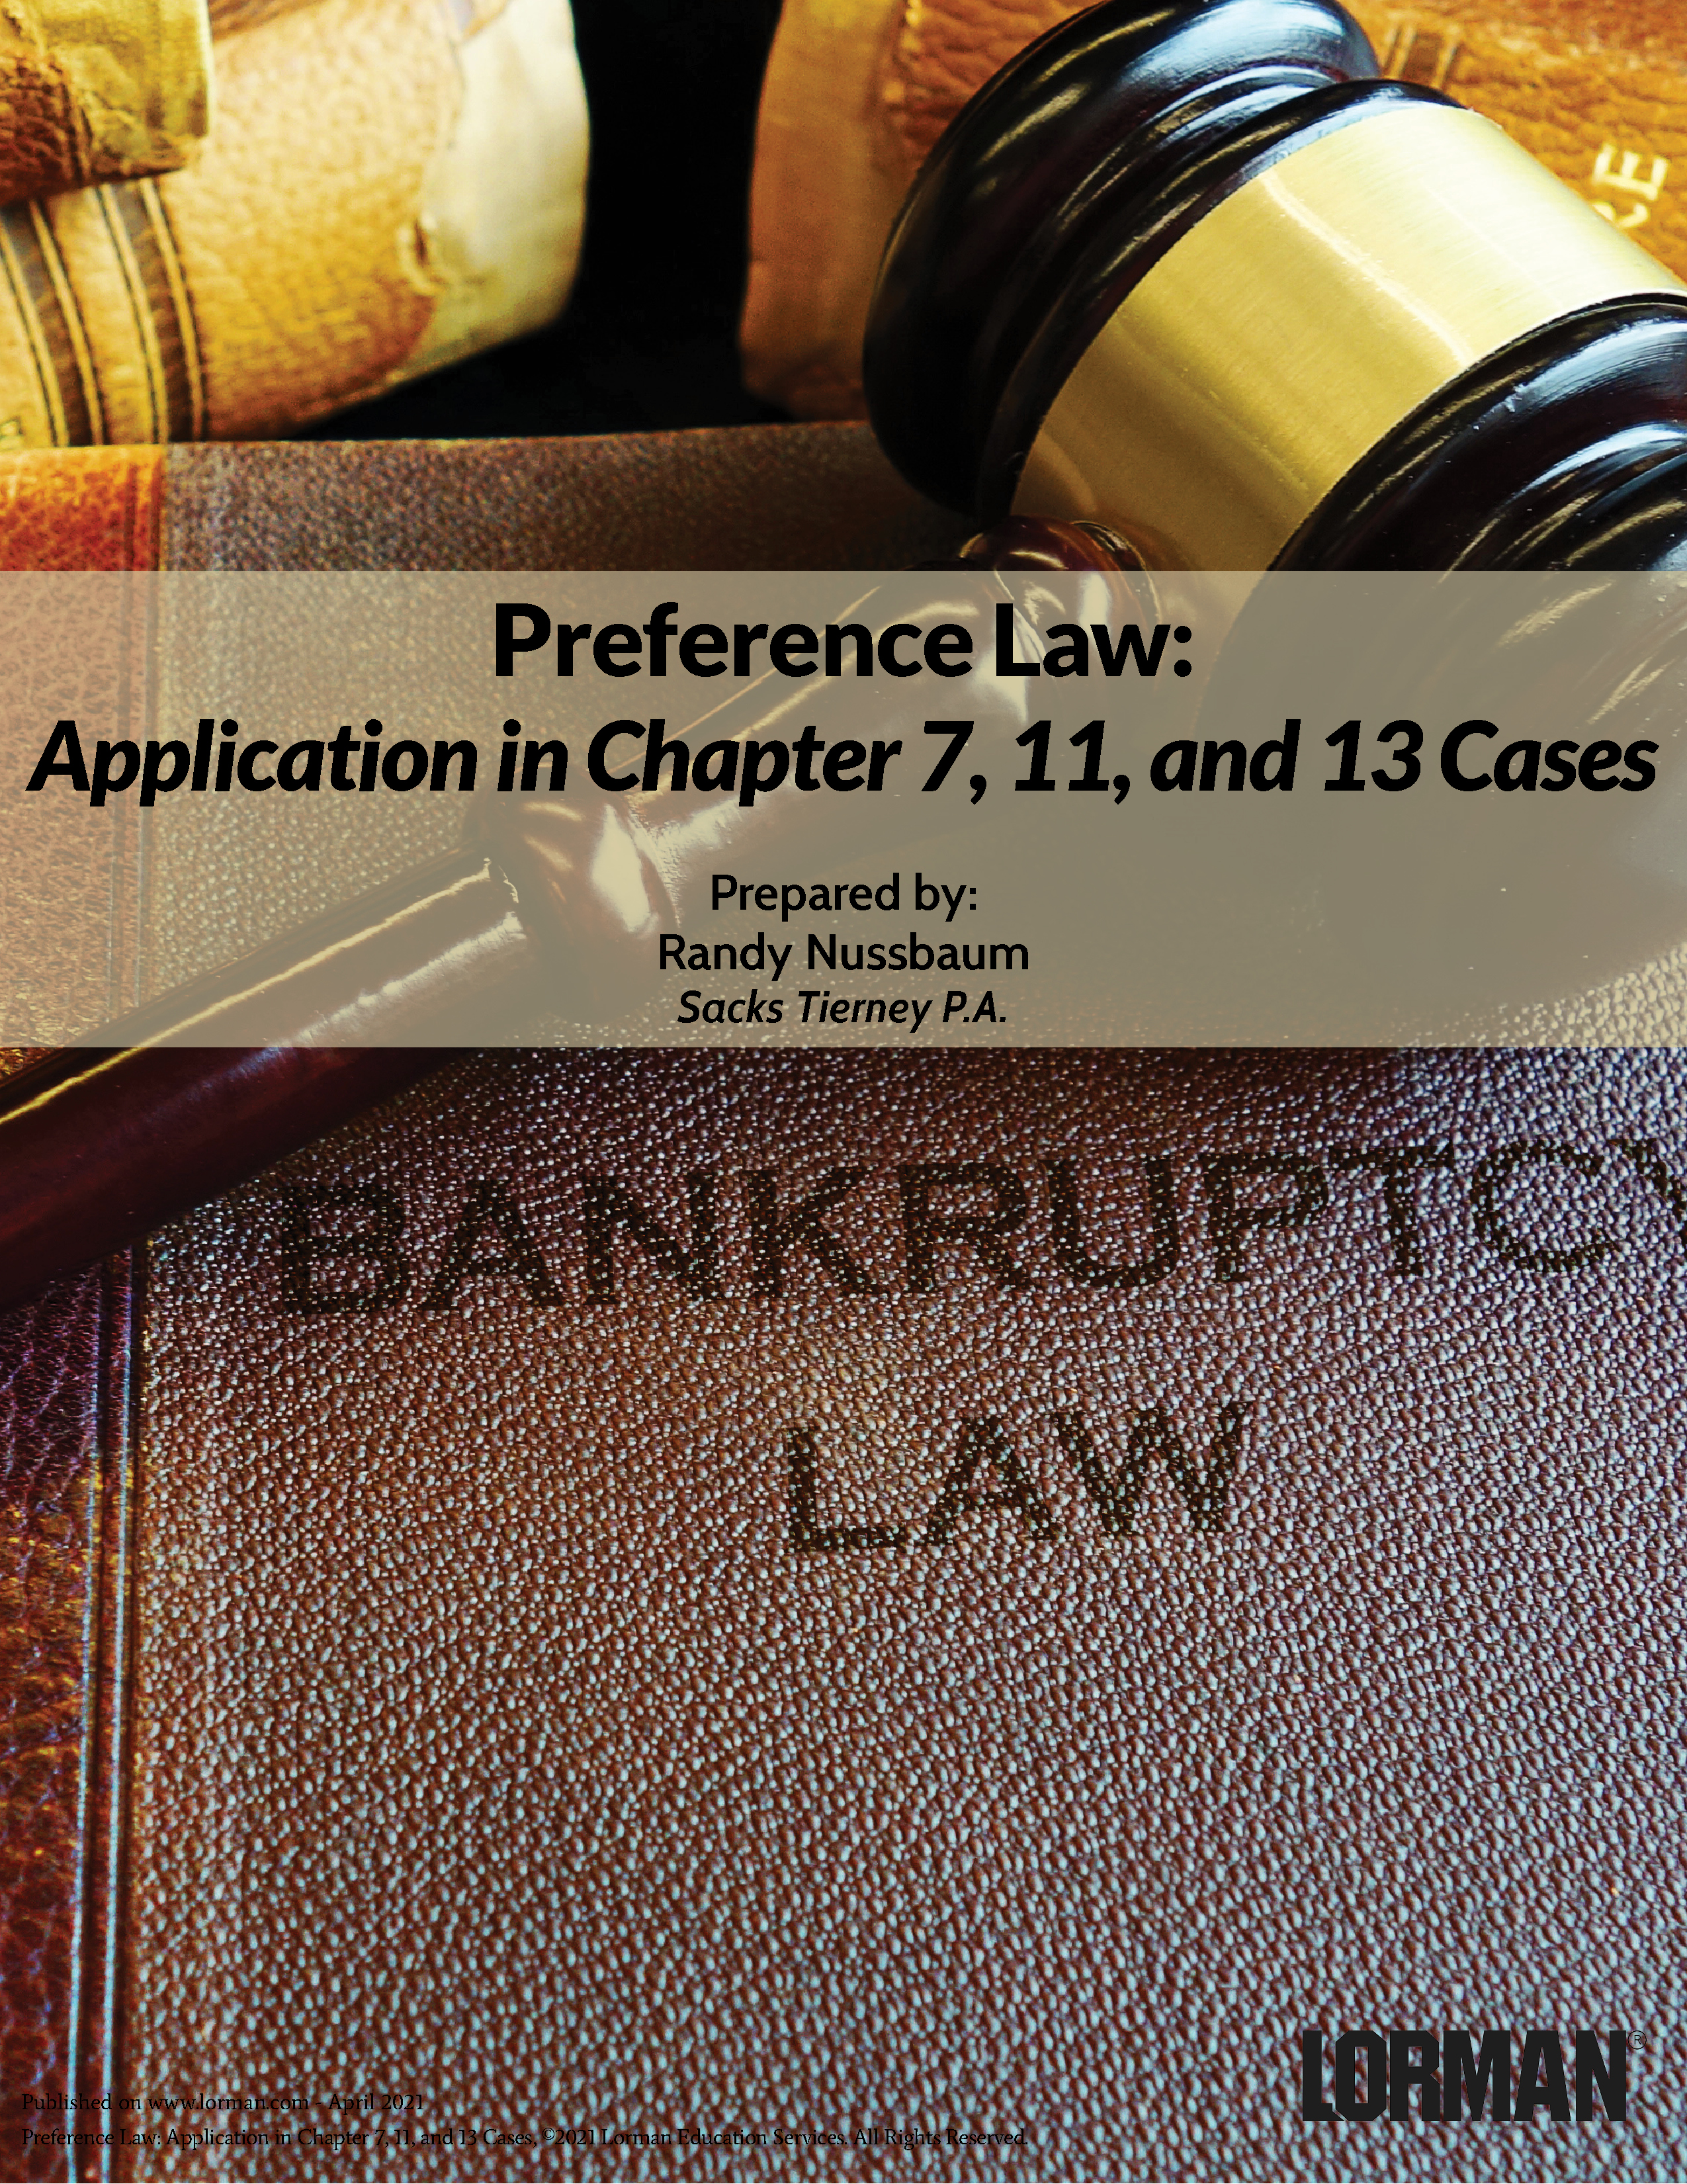 Preference Law: Application in Chapter 7, 11, and 13 Cases